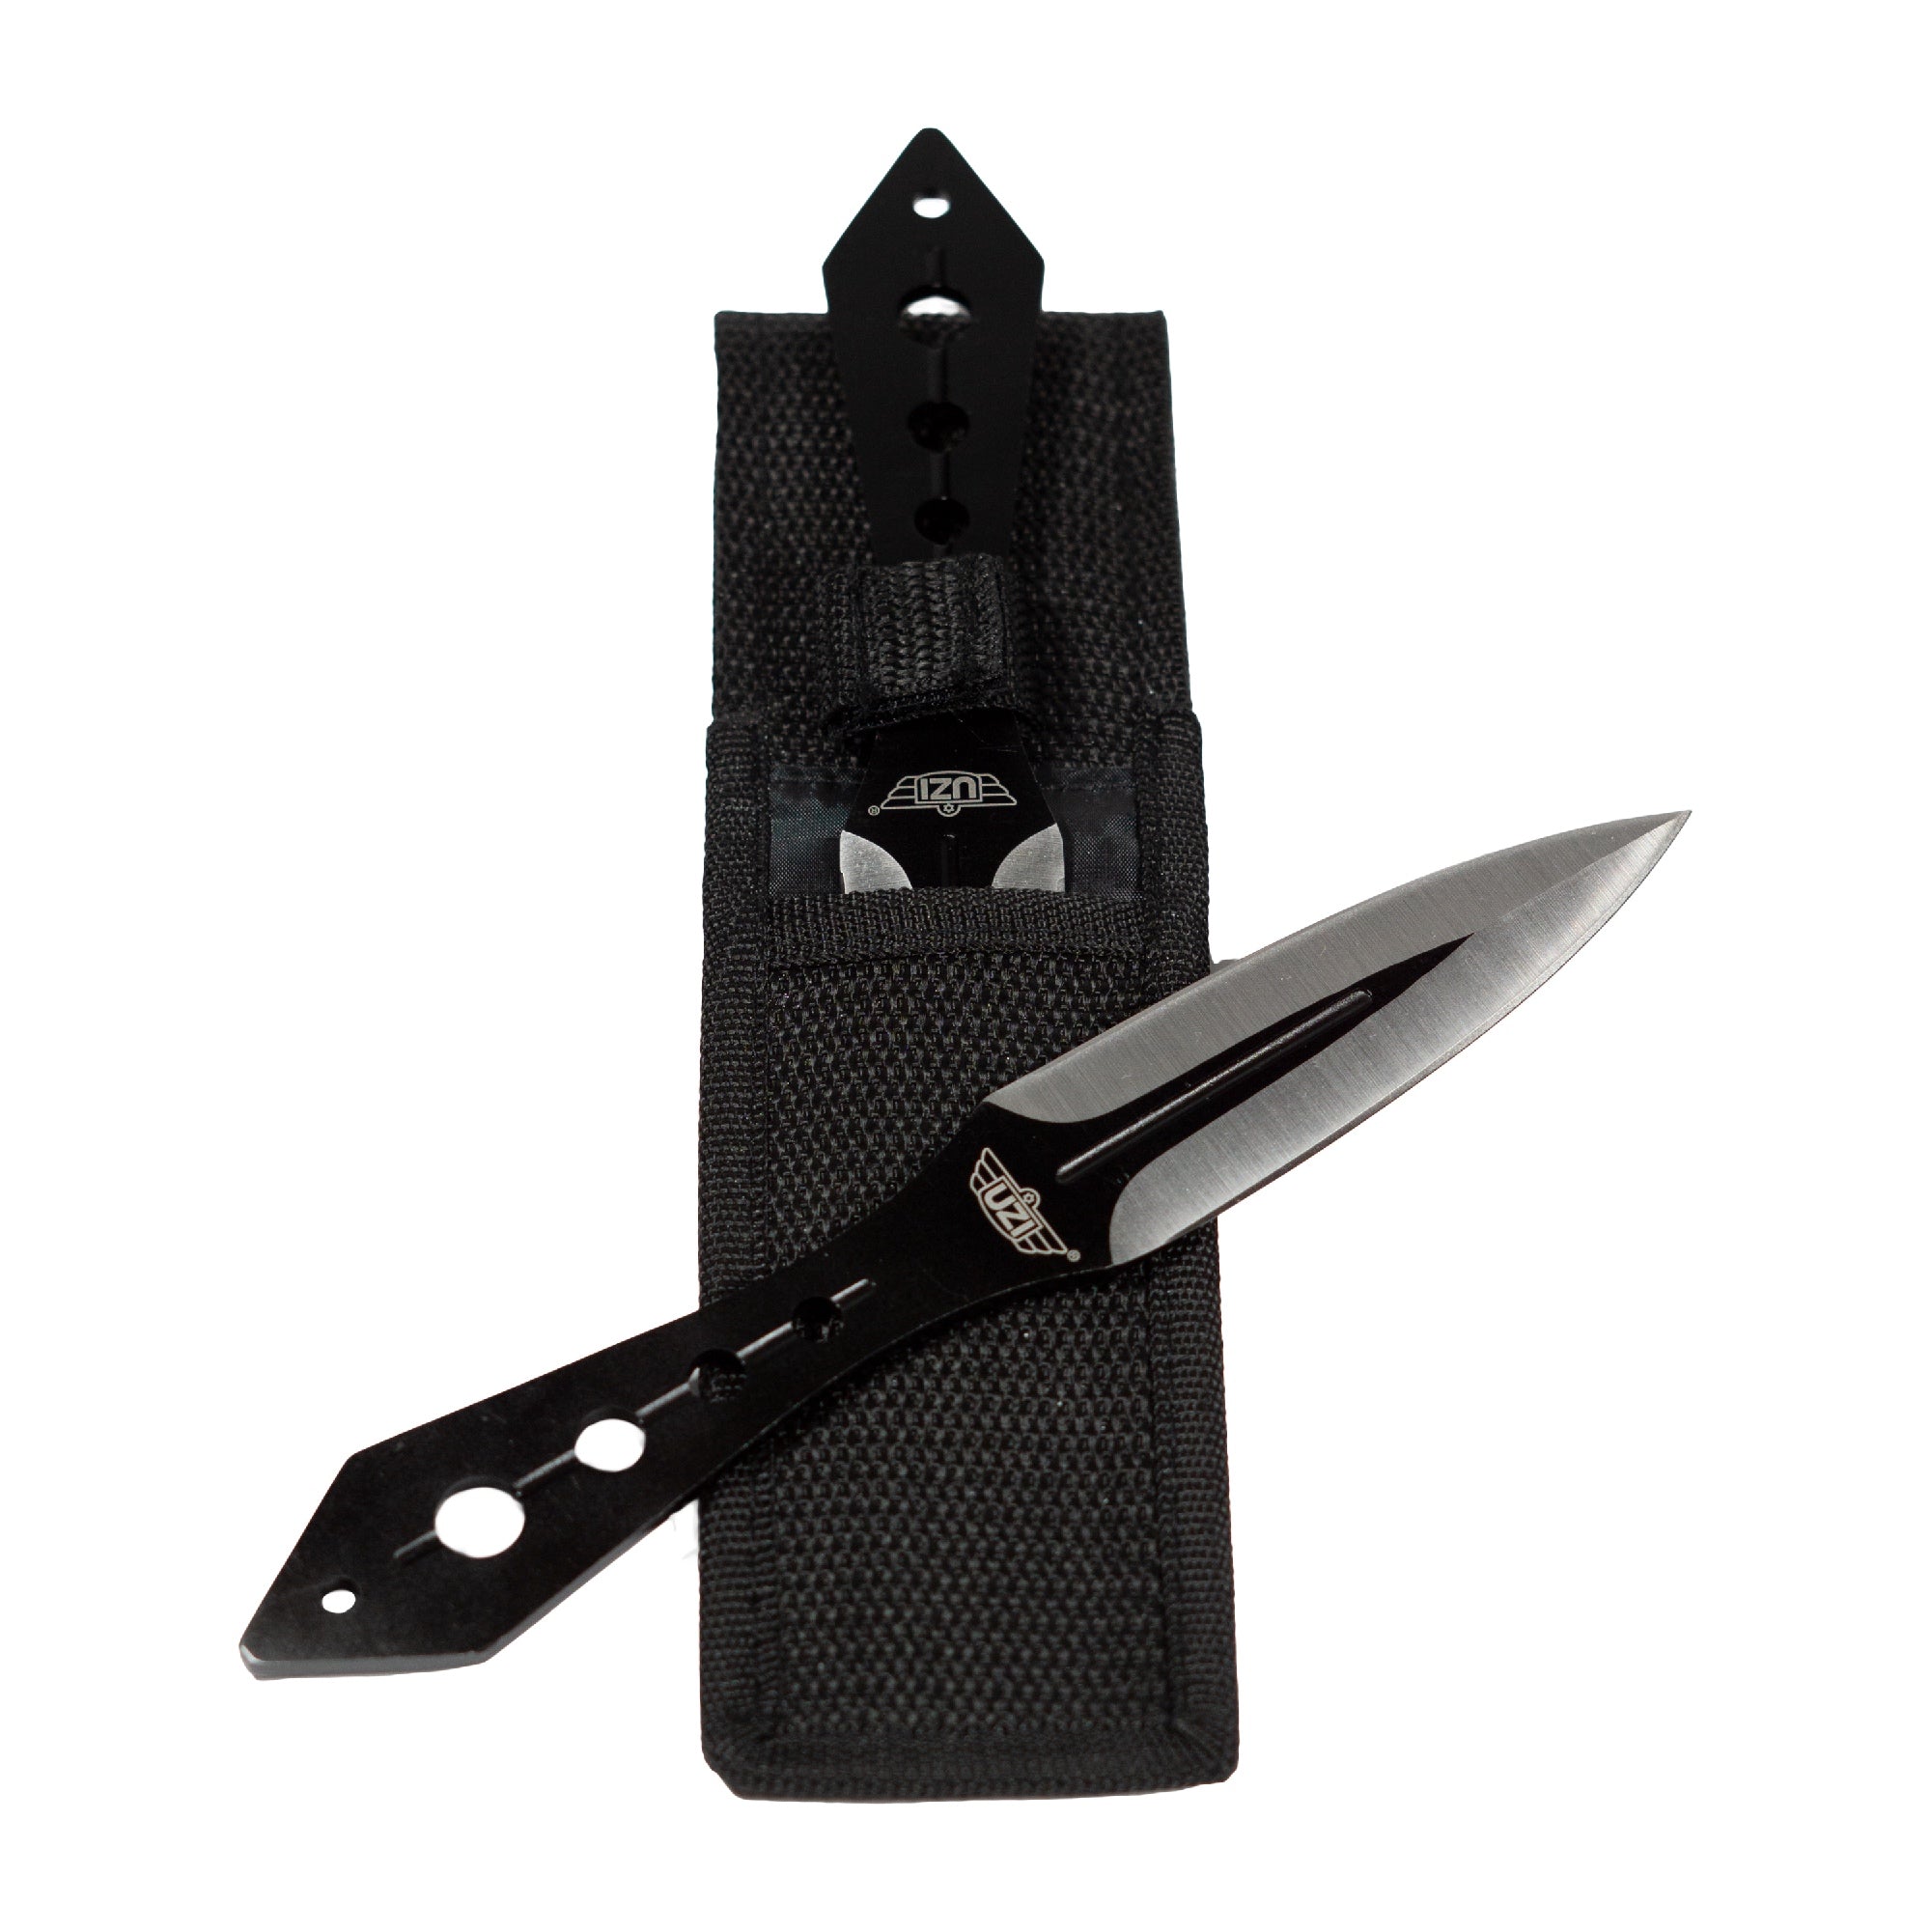 Uzi Throwing Knife Set 2 pc well balanced Throwing fixed blade Knives